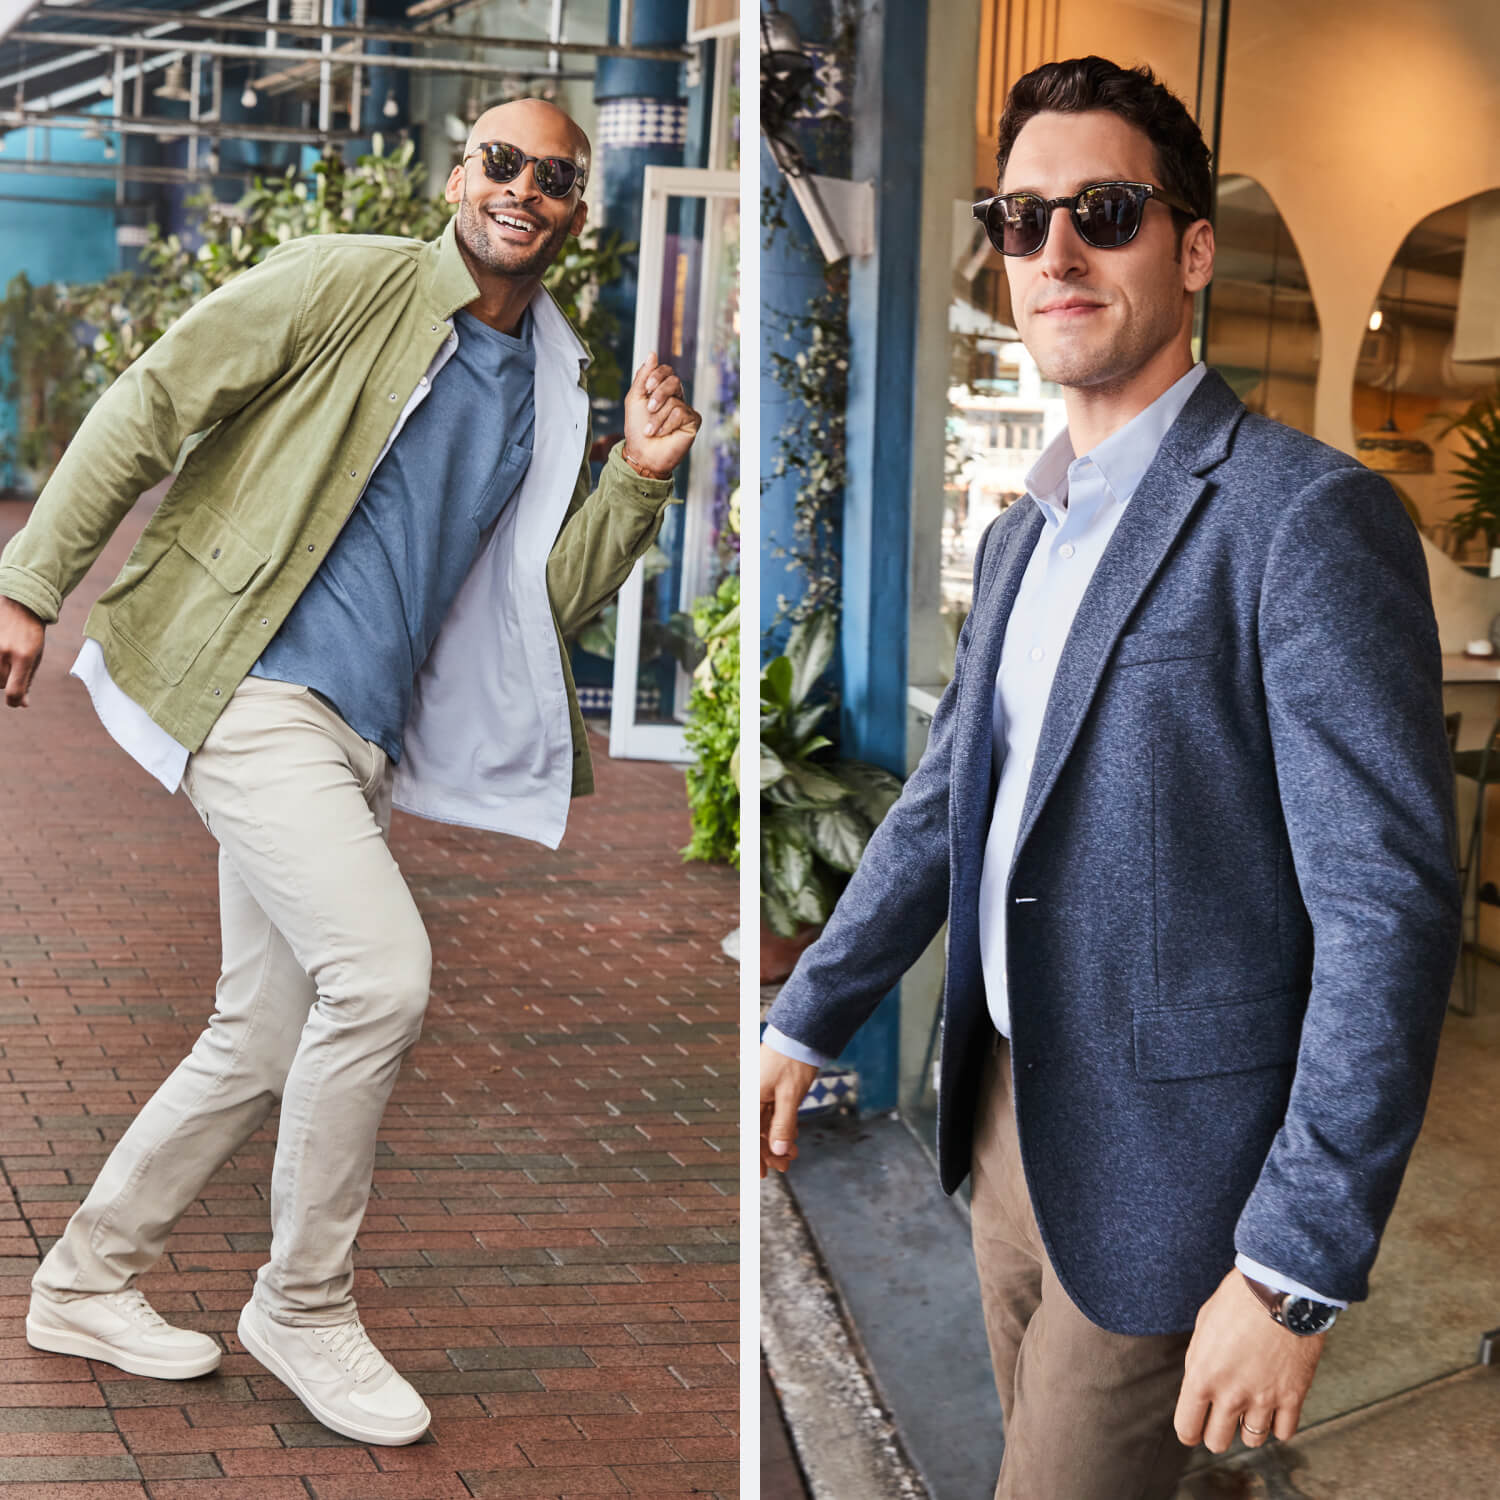 Men’s Spring Fashion: 4 Easy Outfits | Stitch Fix